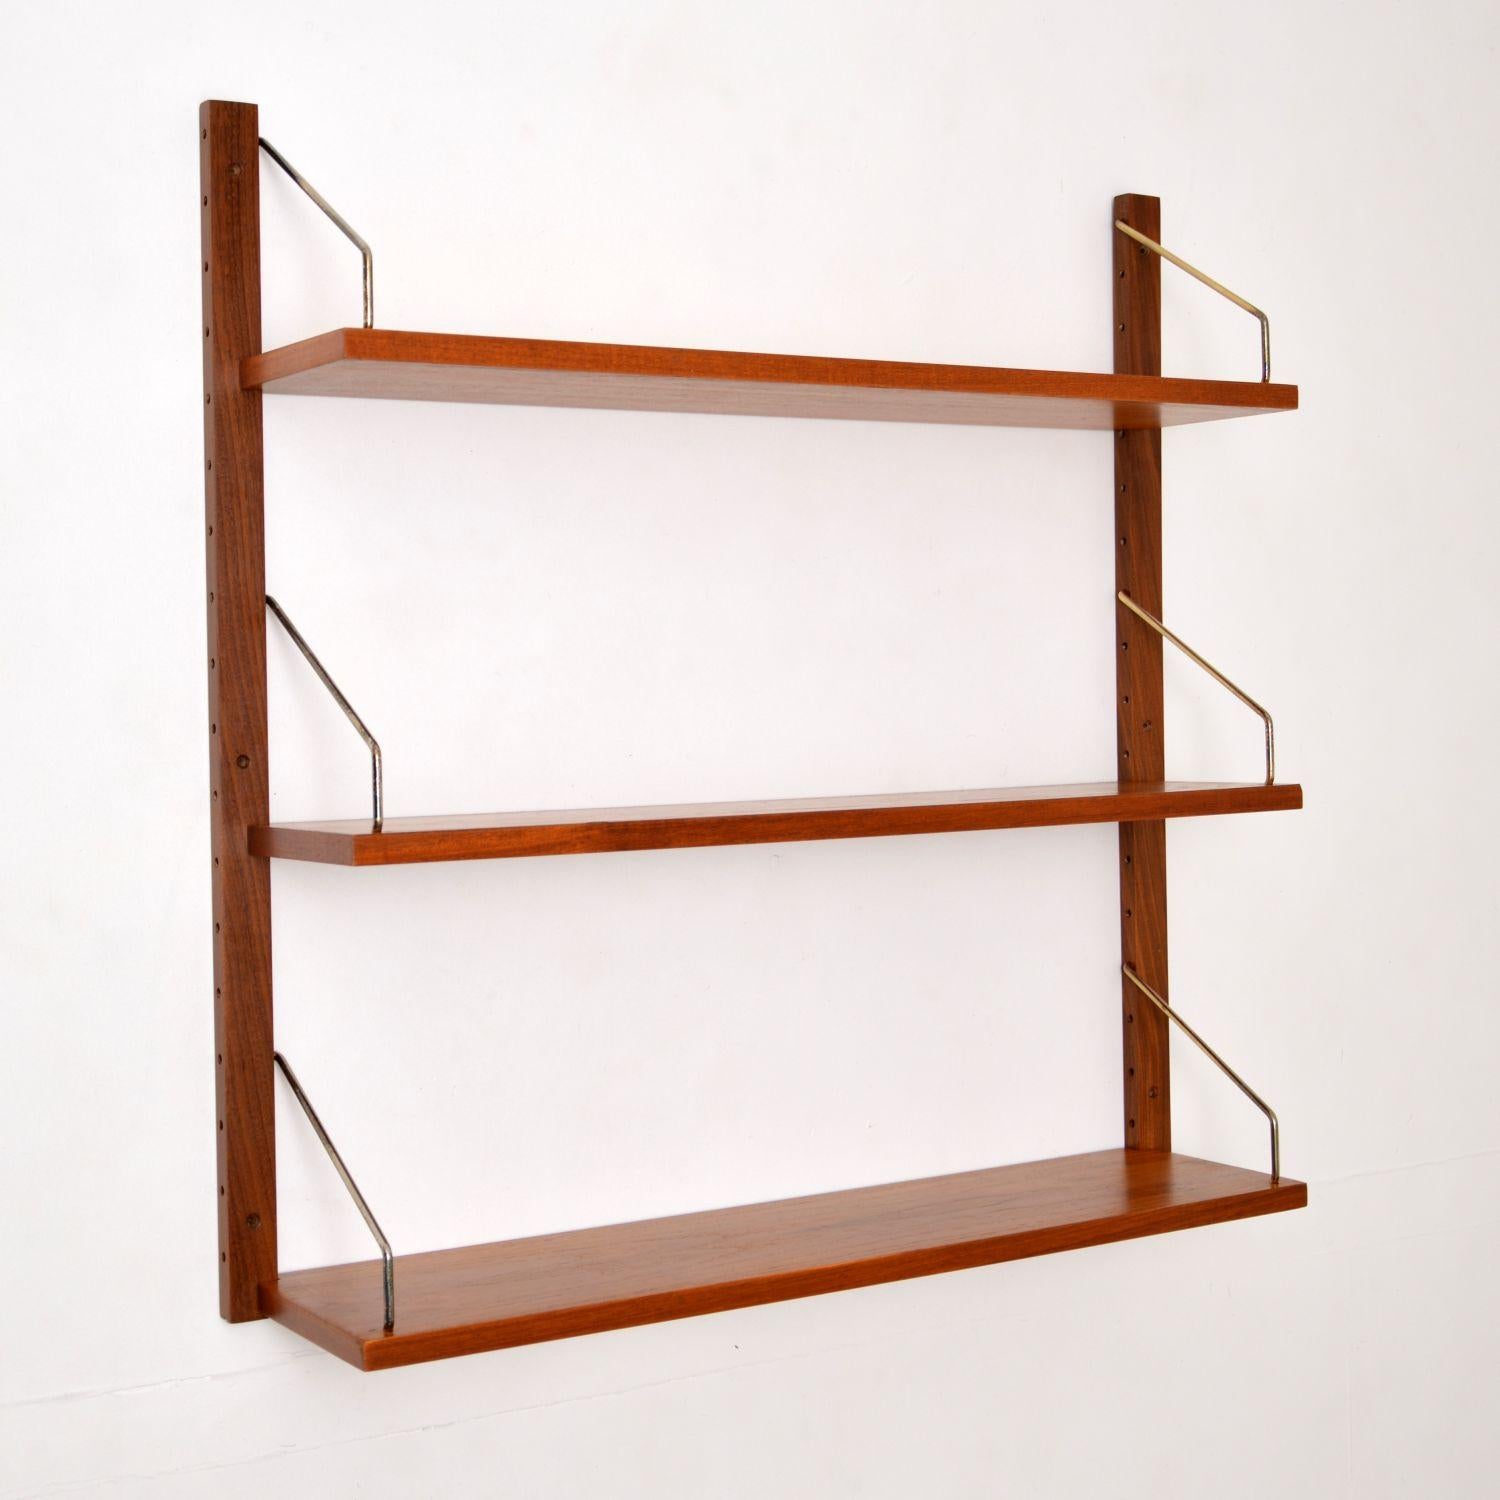 A stylish and top quality vintage Danish teak bookshelf. This was designed by Poul Cadovious and was made by Cado in the 1960s-1970s.

This comes with two wall mounting rails, and three shelves with brass supports. In addition there is a fourth